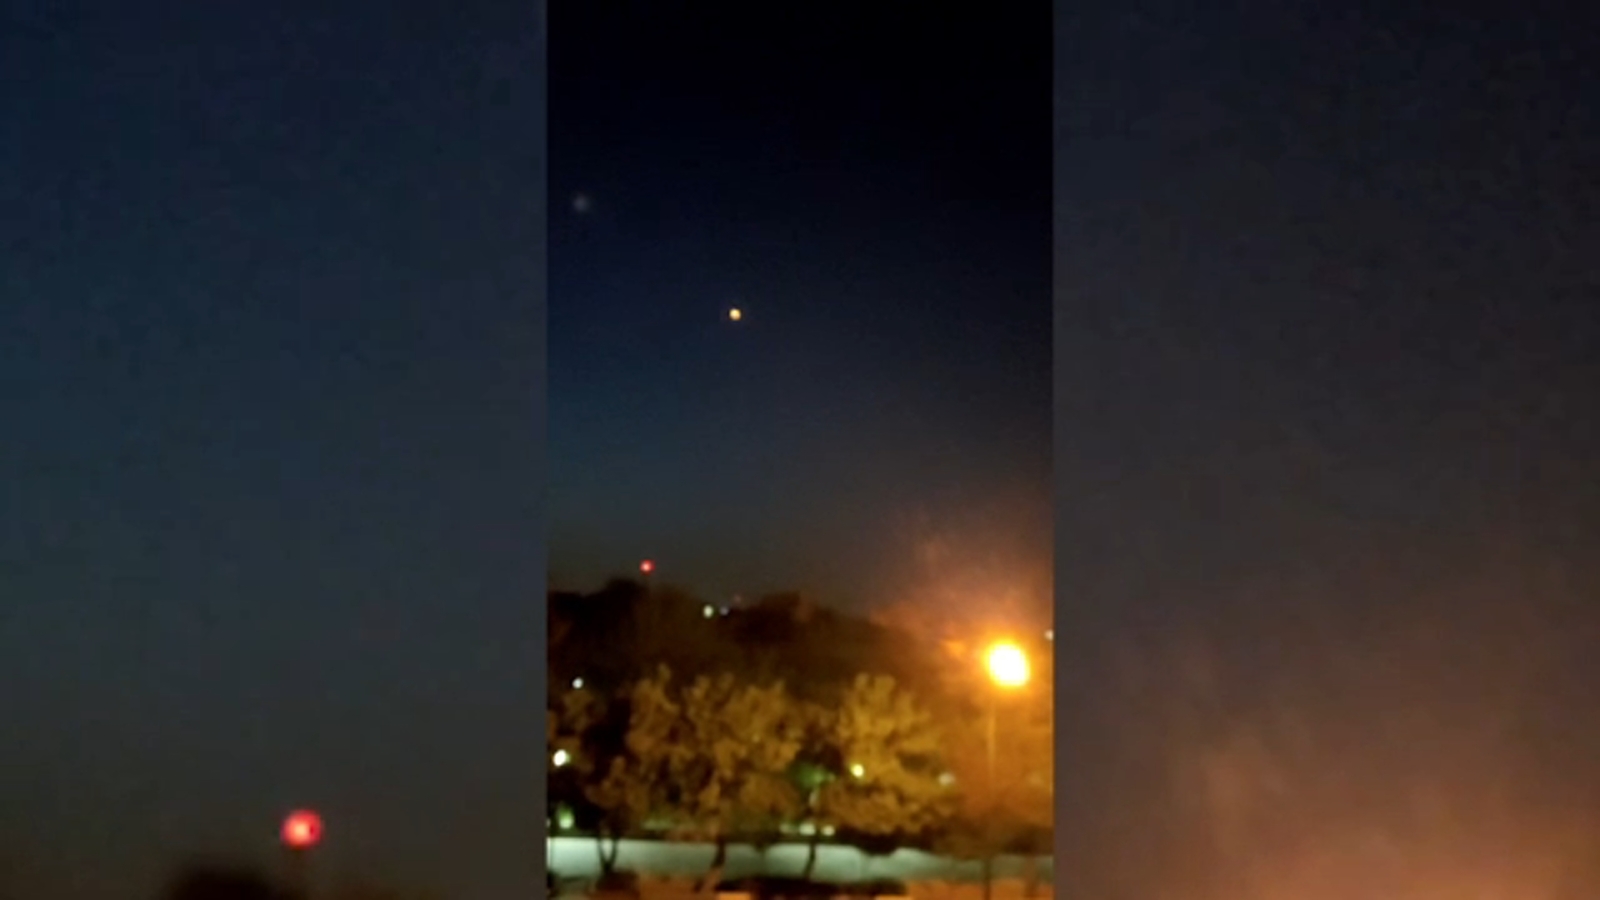 Iran-Israel news: Israeli missiles hit a site in Iran, officials say, after weekend attack blocked by Iron Dome [Video]